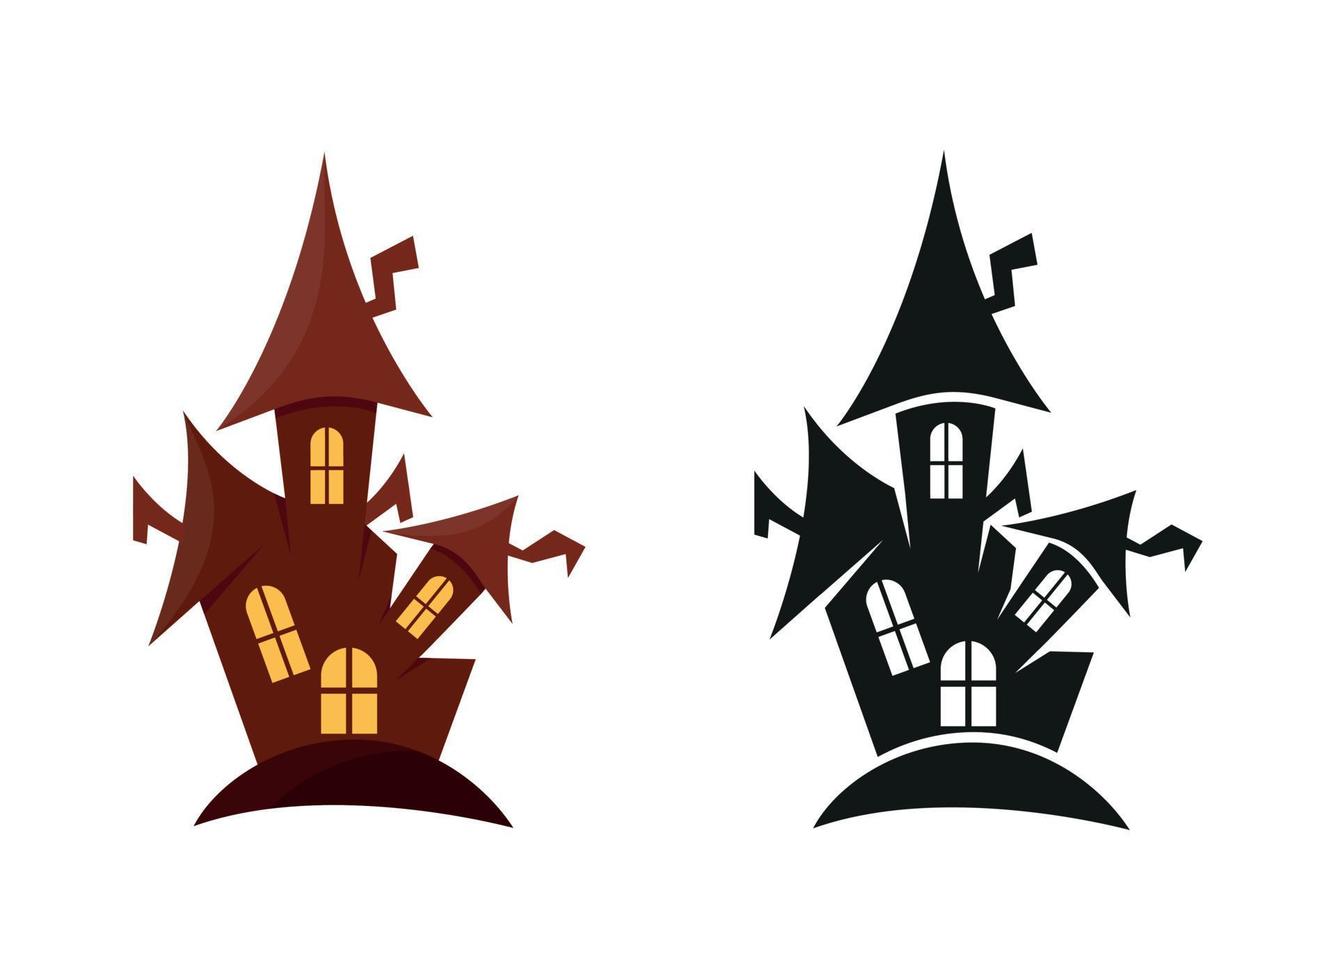 Big Ghost House Vector Clip Art And Illustration Design Set. Horror Hi-Quality Ghost Home Design, Unique Free Download With Vector File.